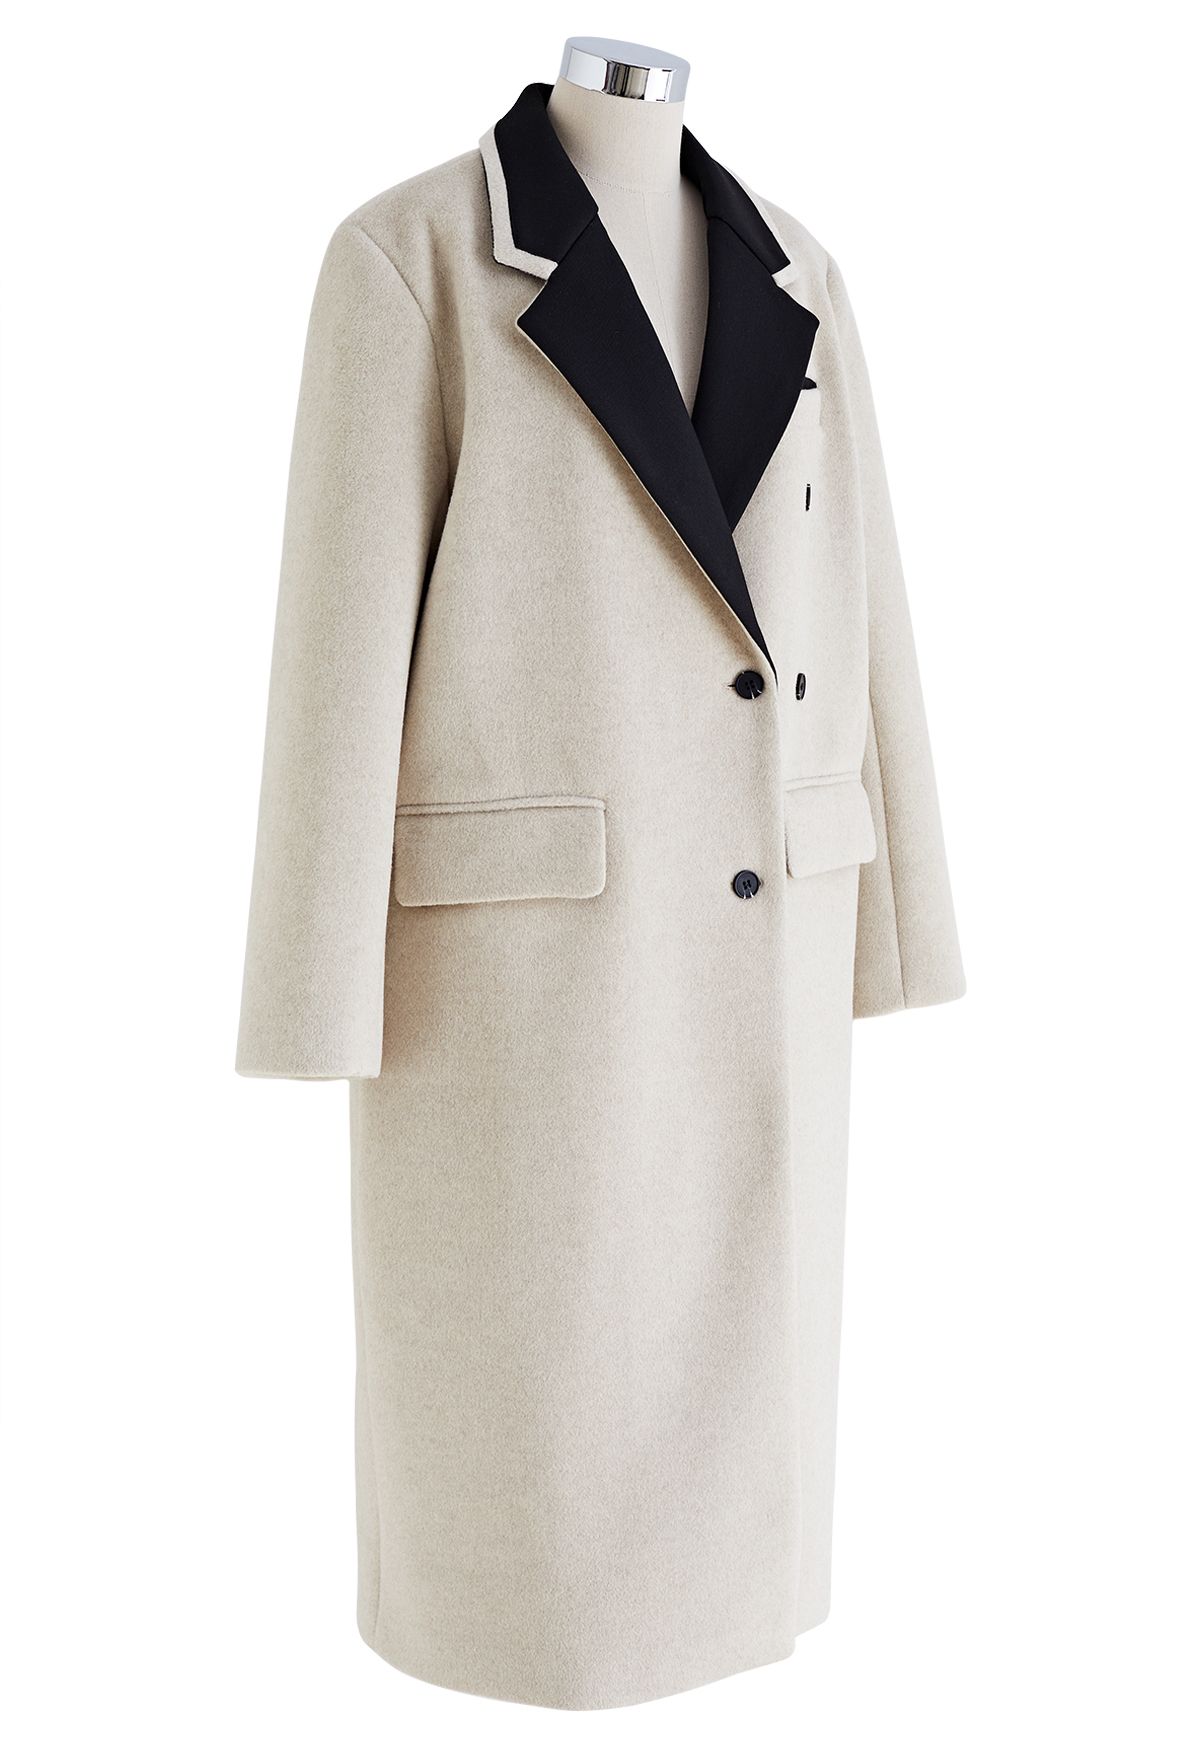 Contrast Collar Wool-Blend Longline Coat - Retro, Indie and Unique Fashion